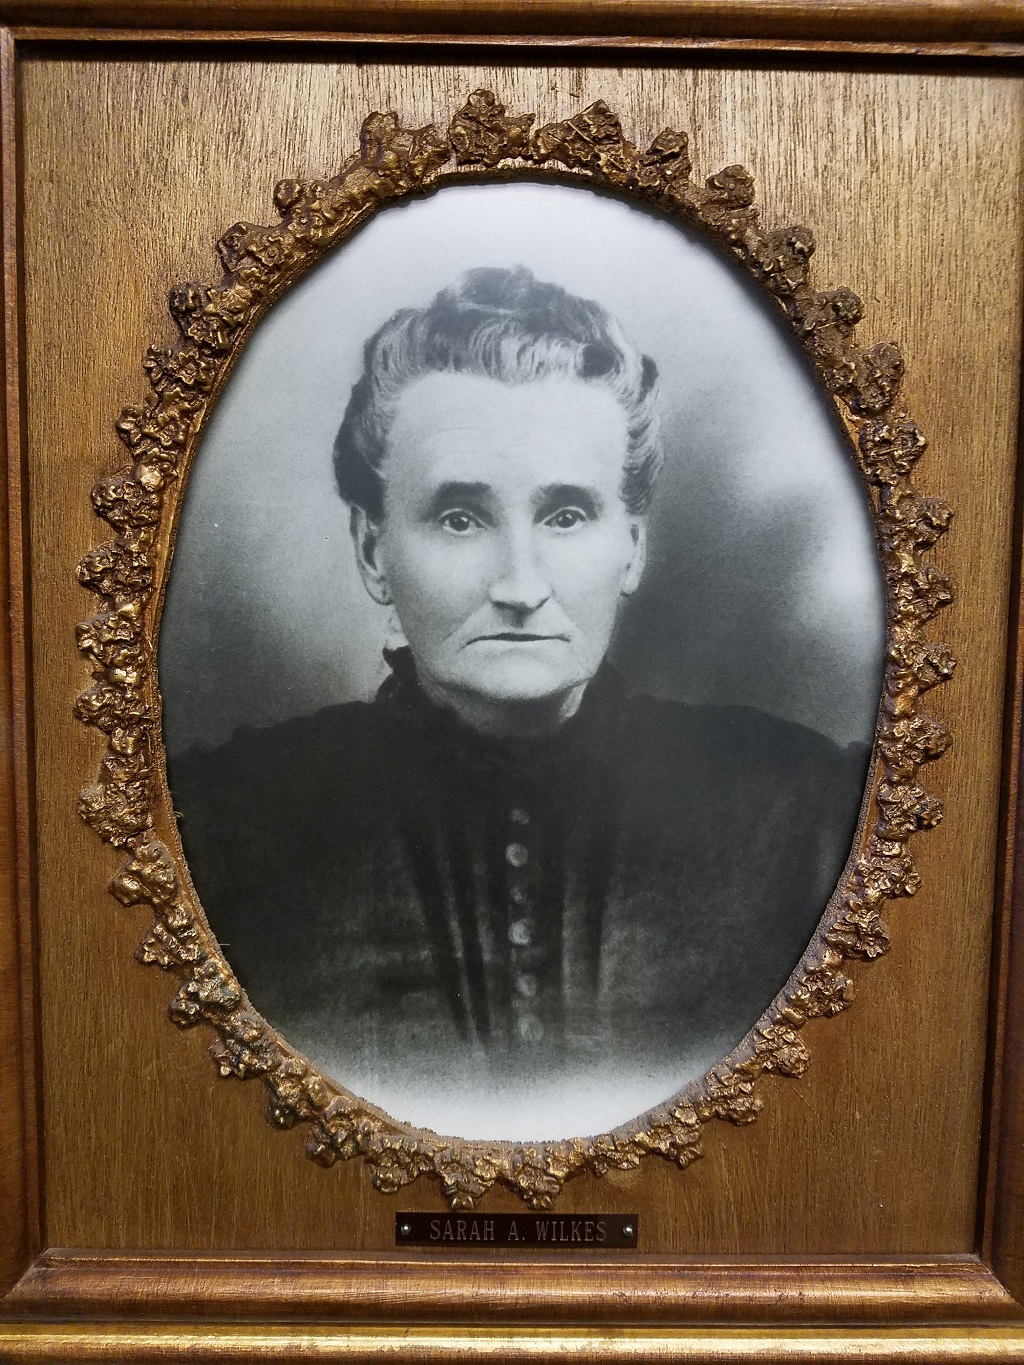 Sarah A Wilkes, wife of William C Wilkes, east Portland pioneer 1850's. Click to enlarge